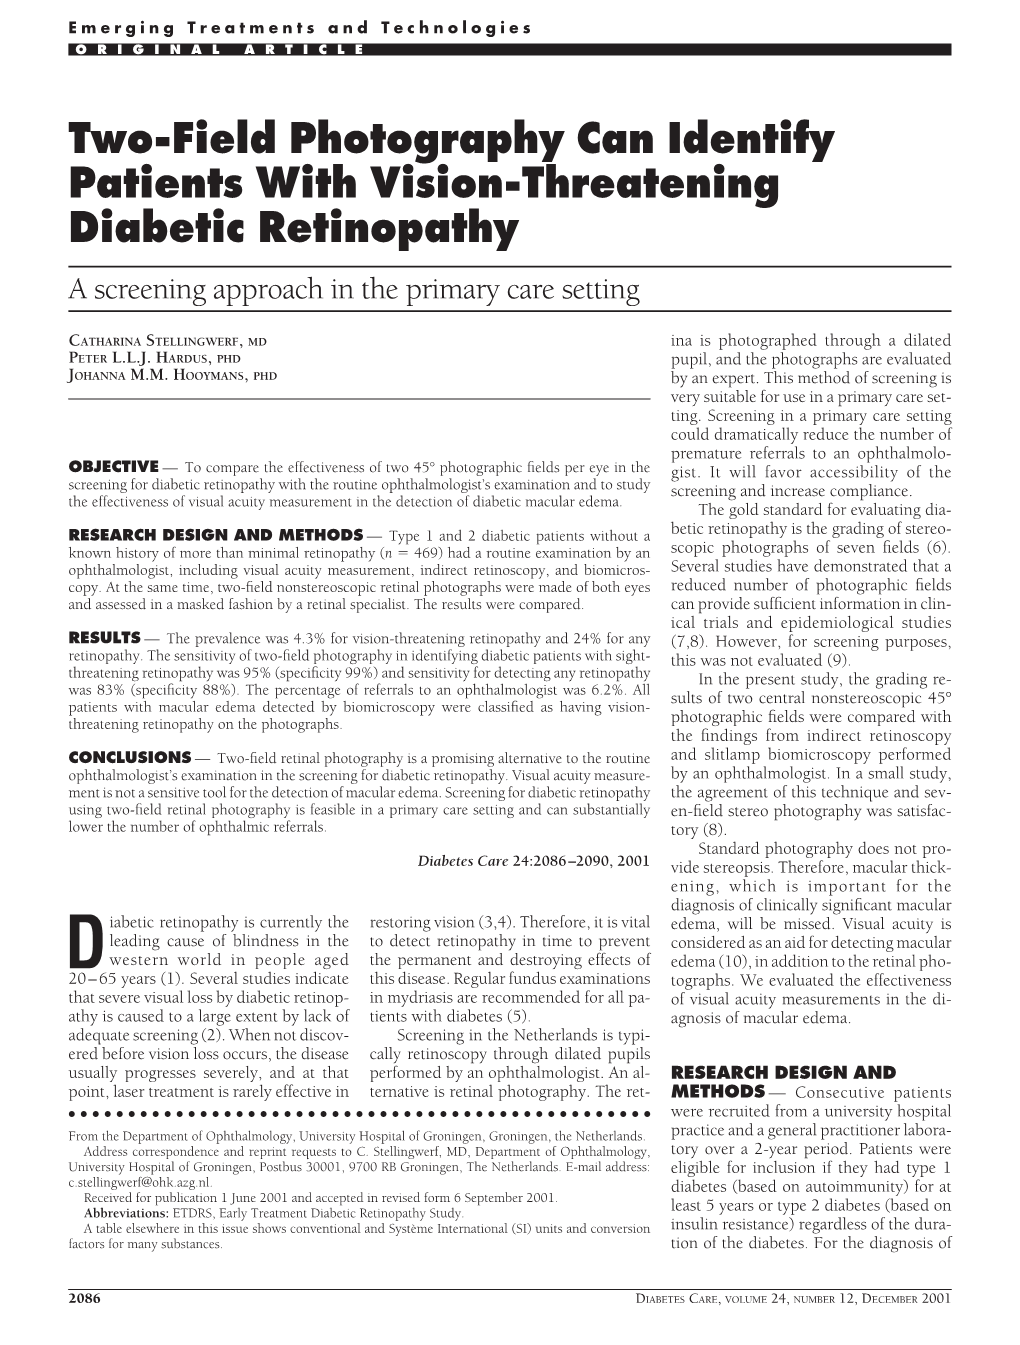 Two-Field Photography Can Identify Patients with Vision-Threatening Diabetic Retinopathy a Screening Approach in the Primary Care Setting